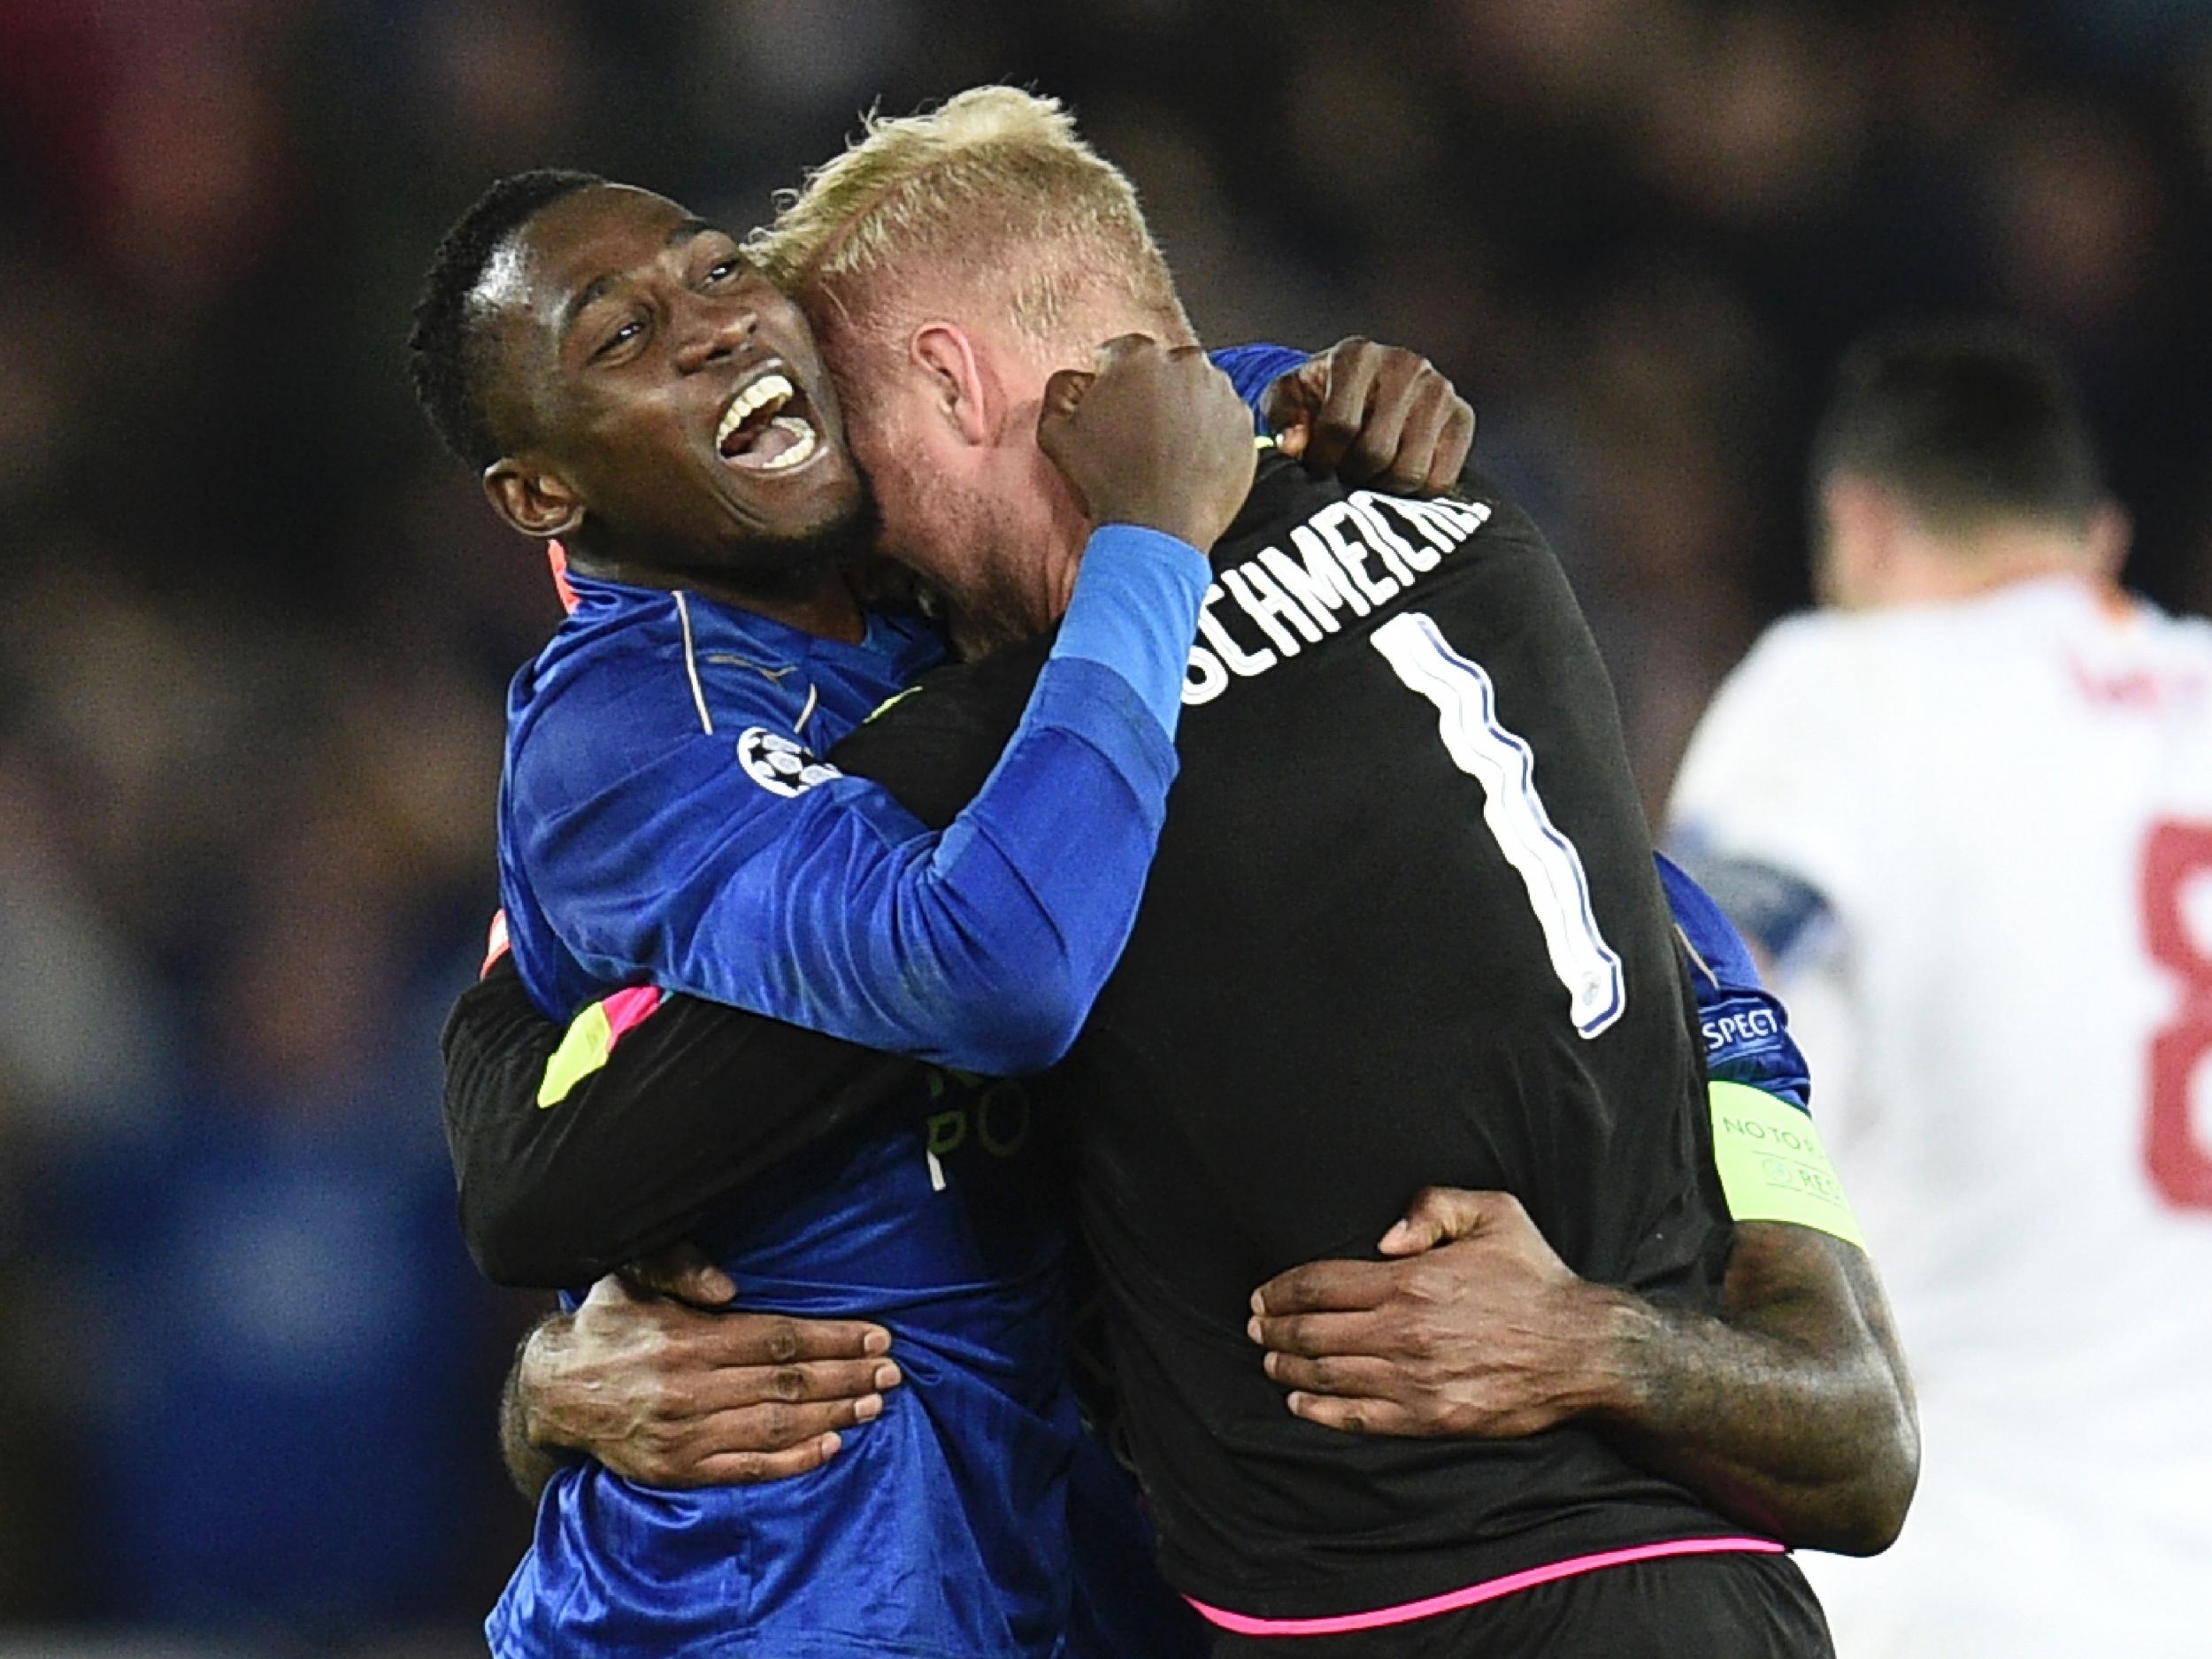 Schmeichel was Leicester's hero once again